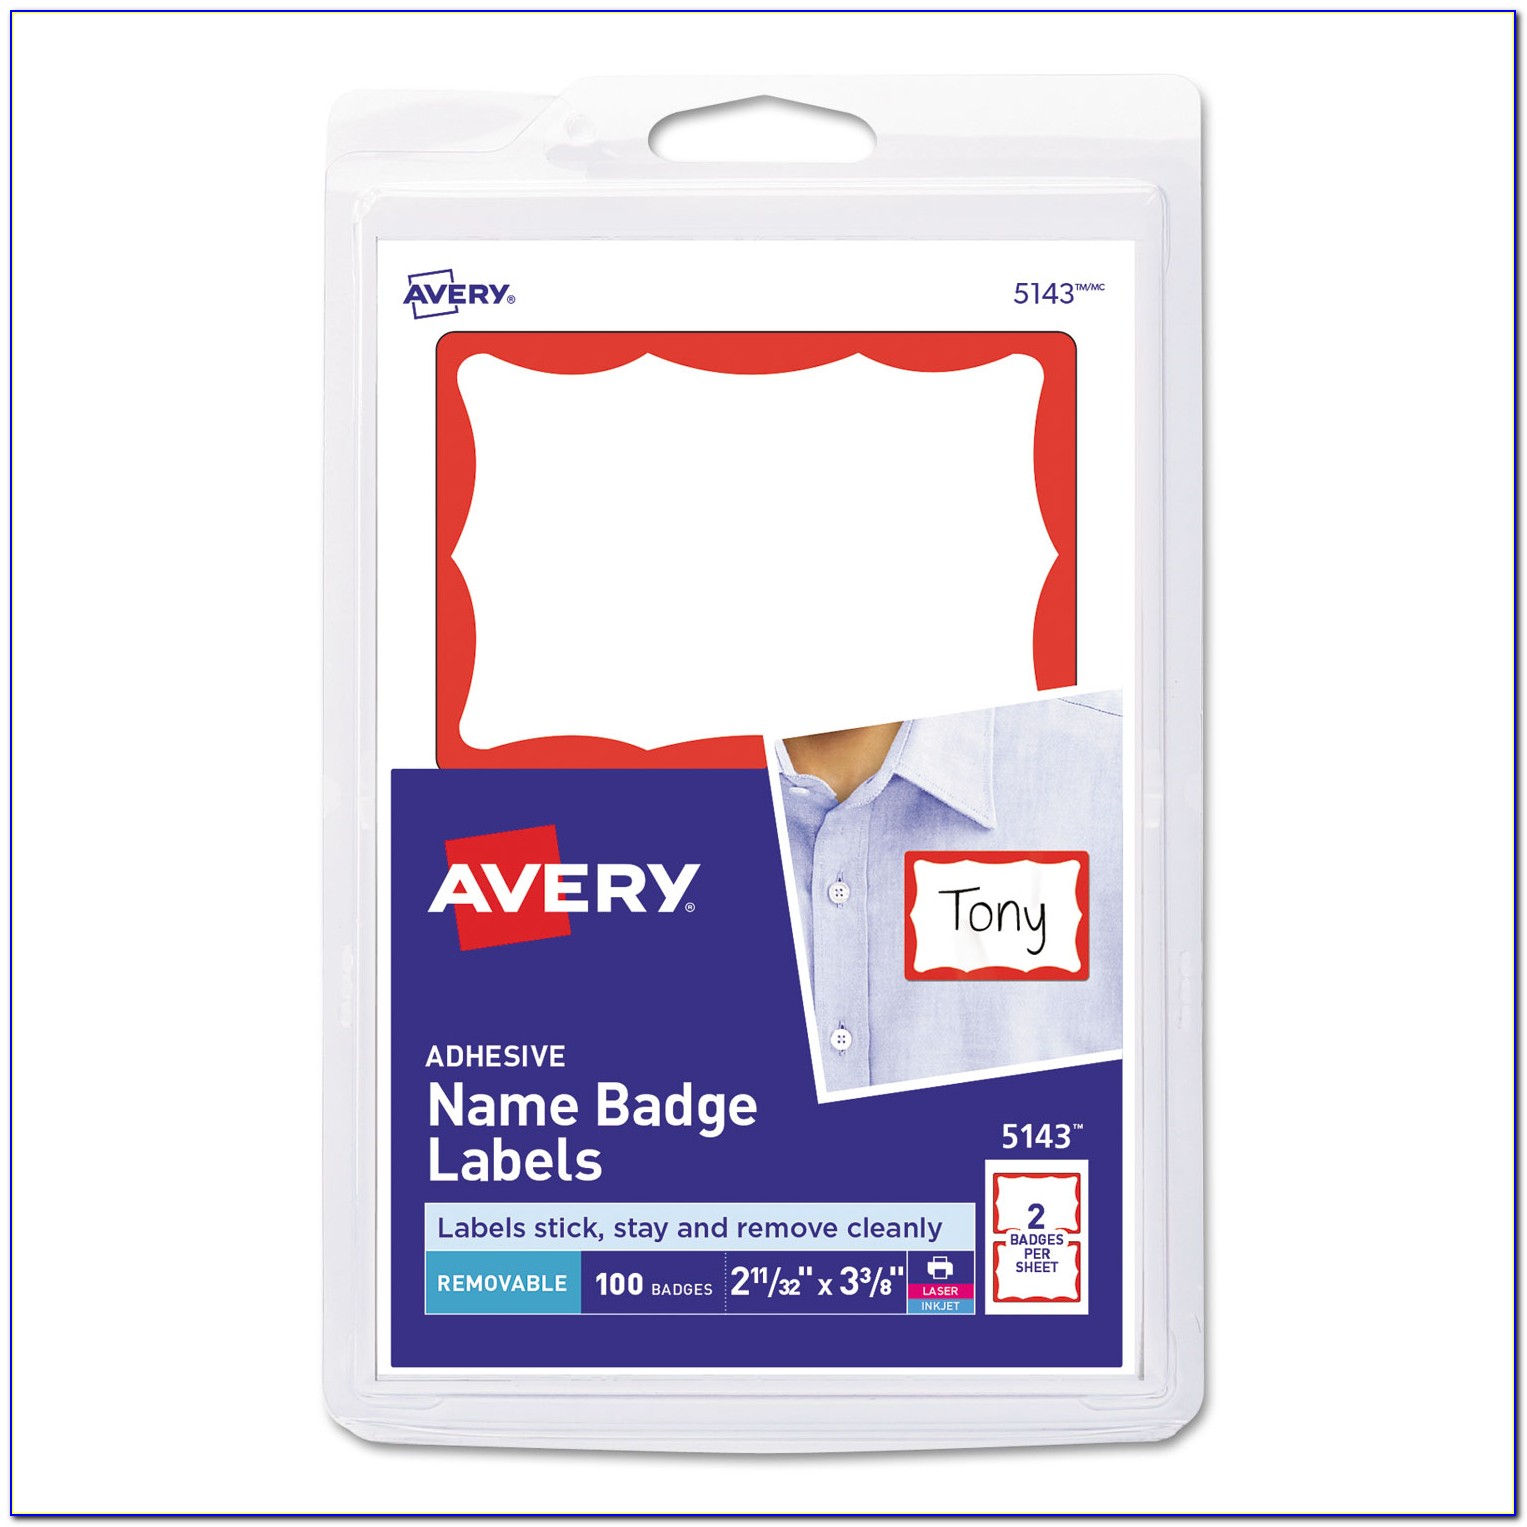 free avery address label software for mac 10.7